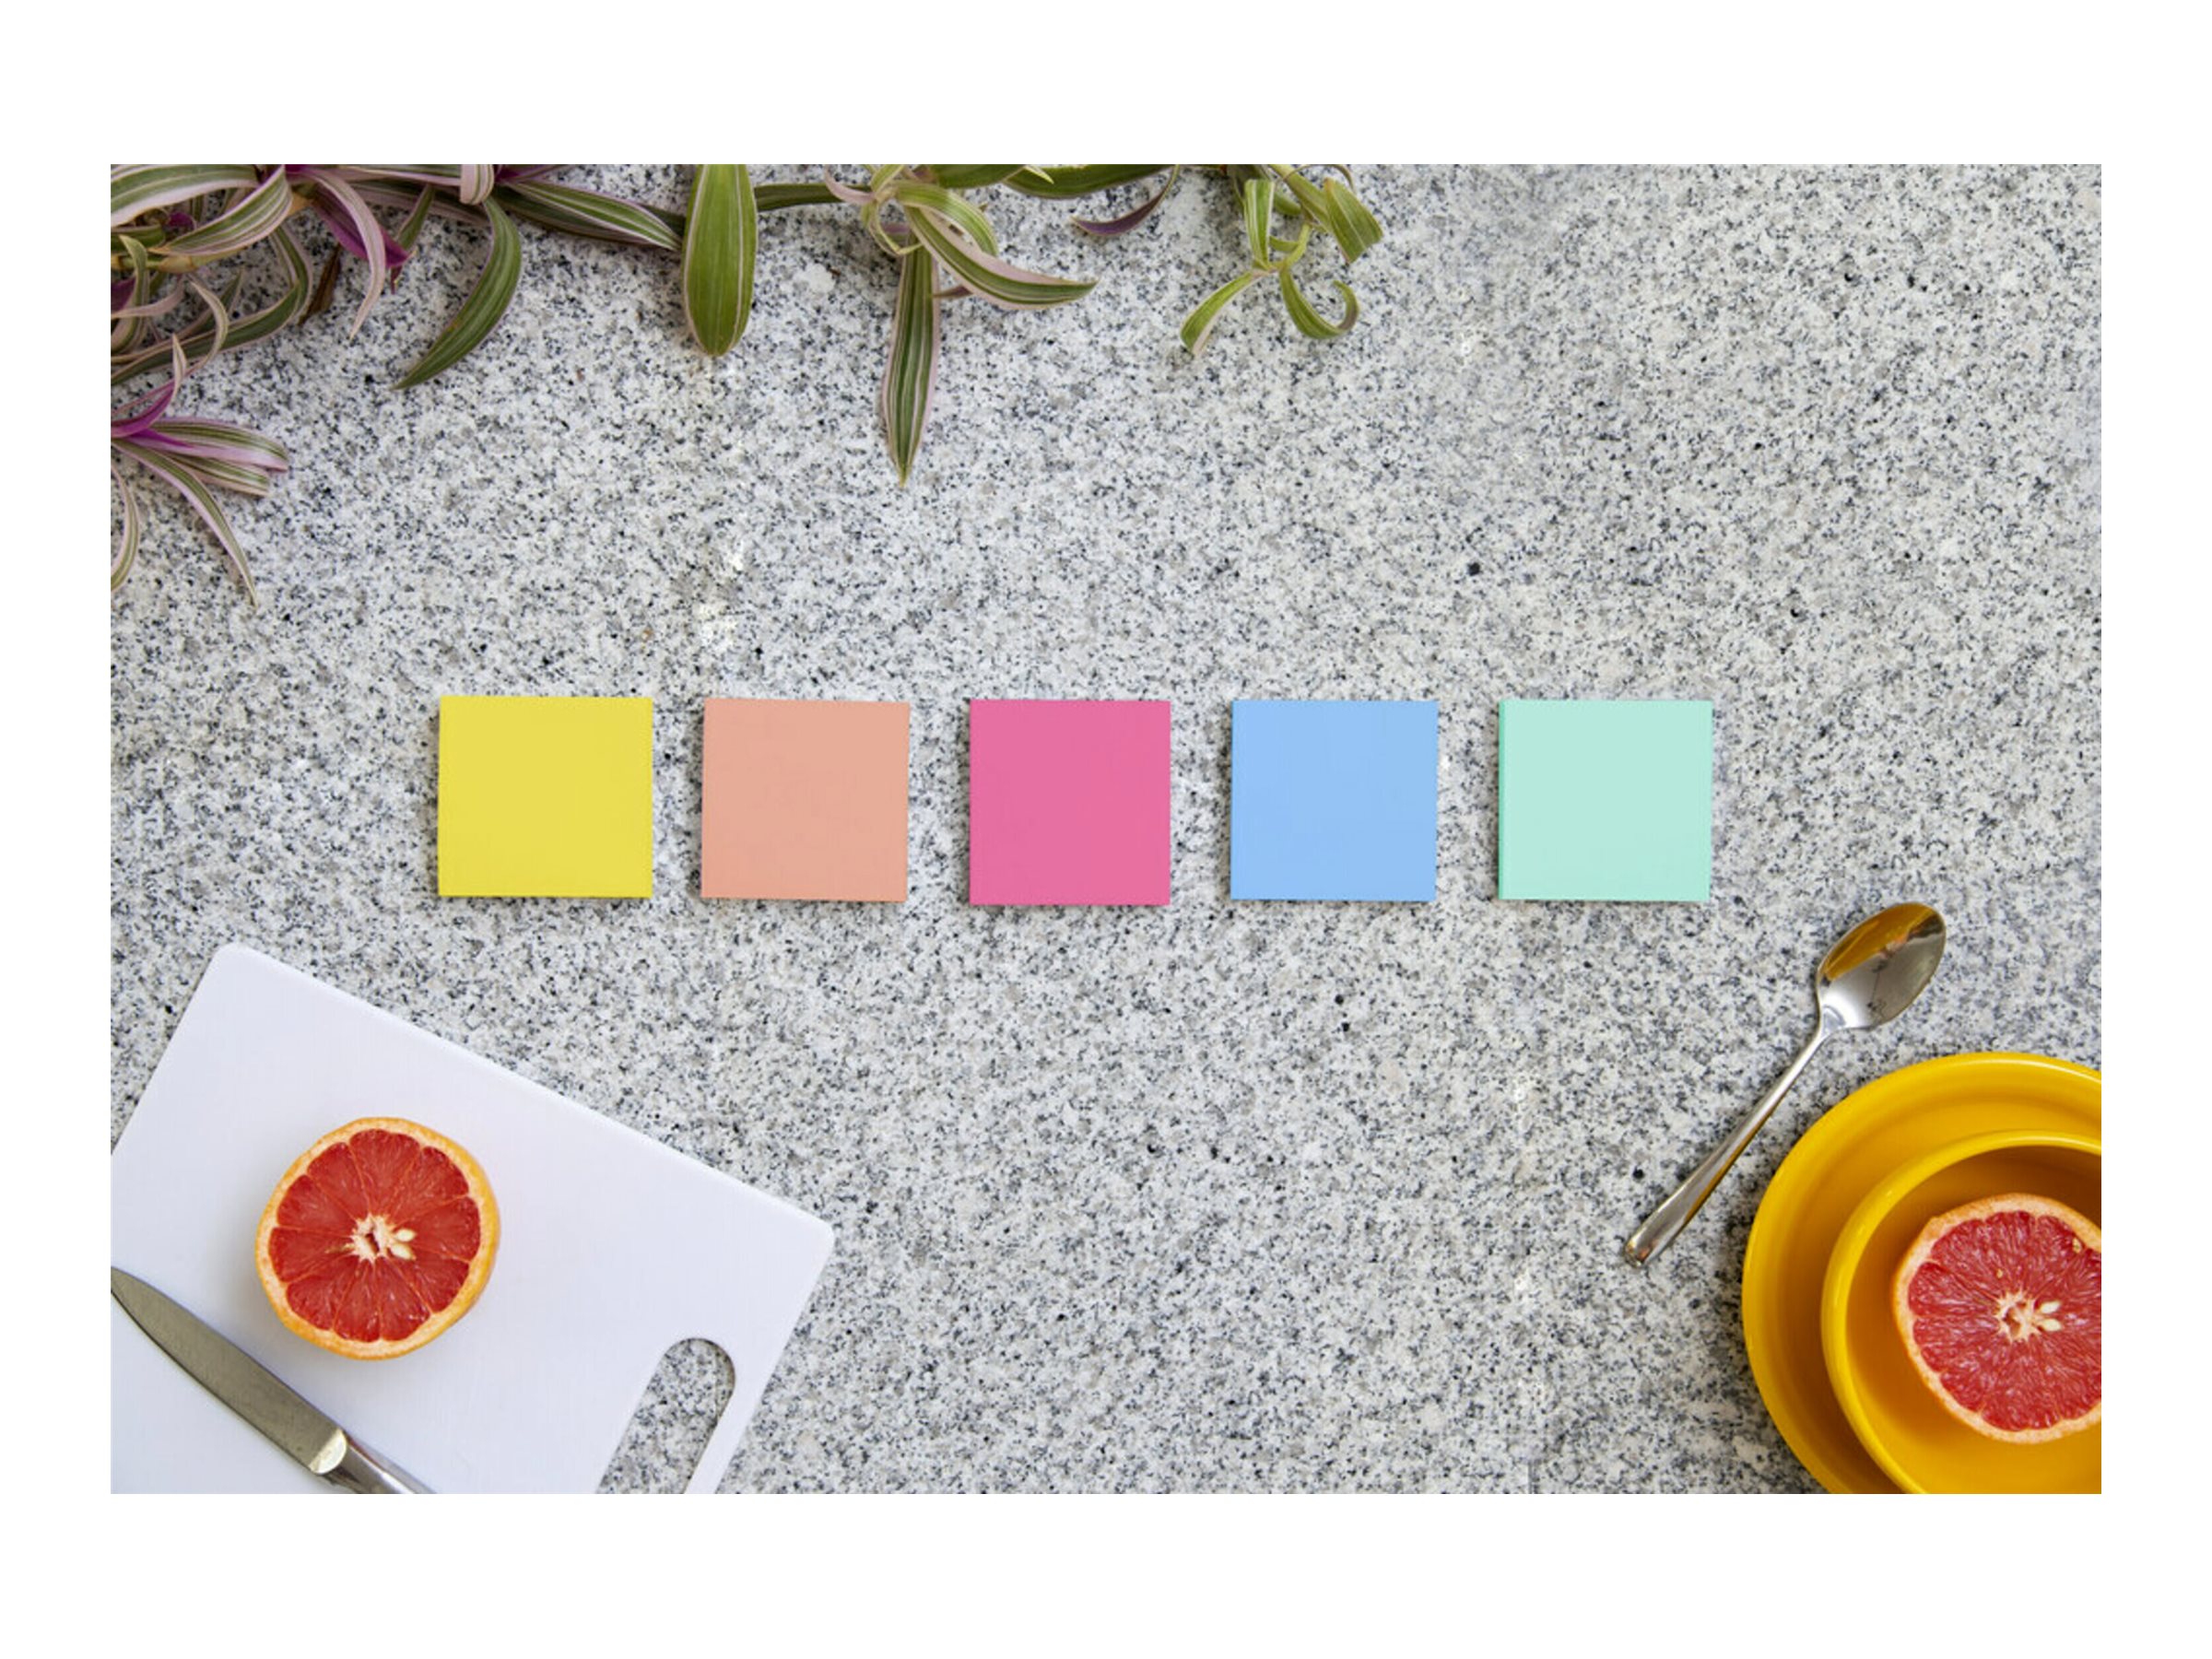 Post-it Super Sticky Summer Joy Collection Notes - 3 x 45 sheets